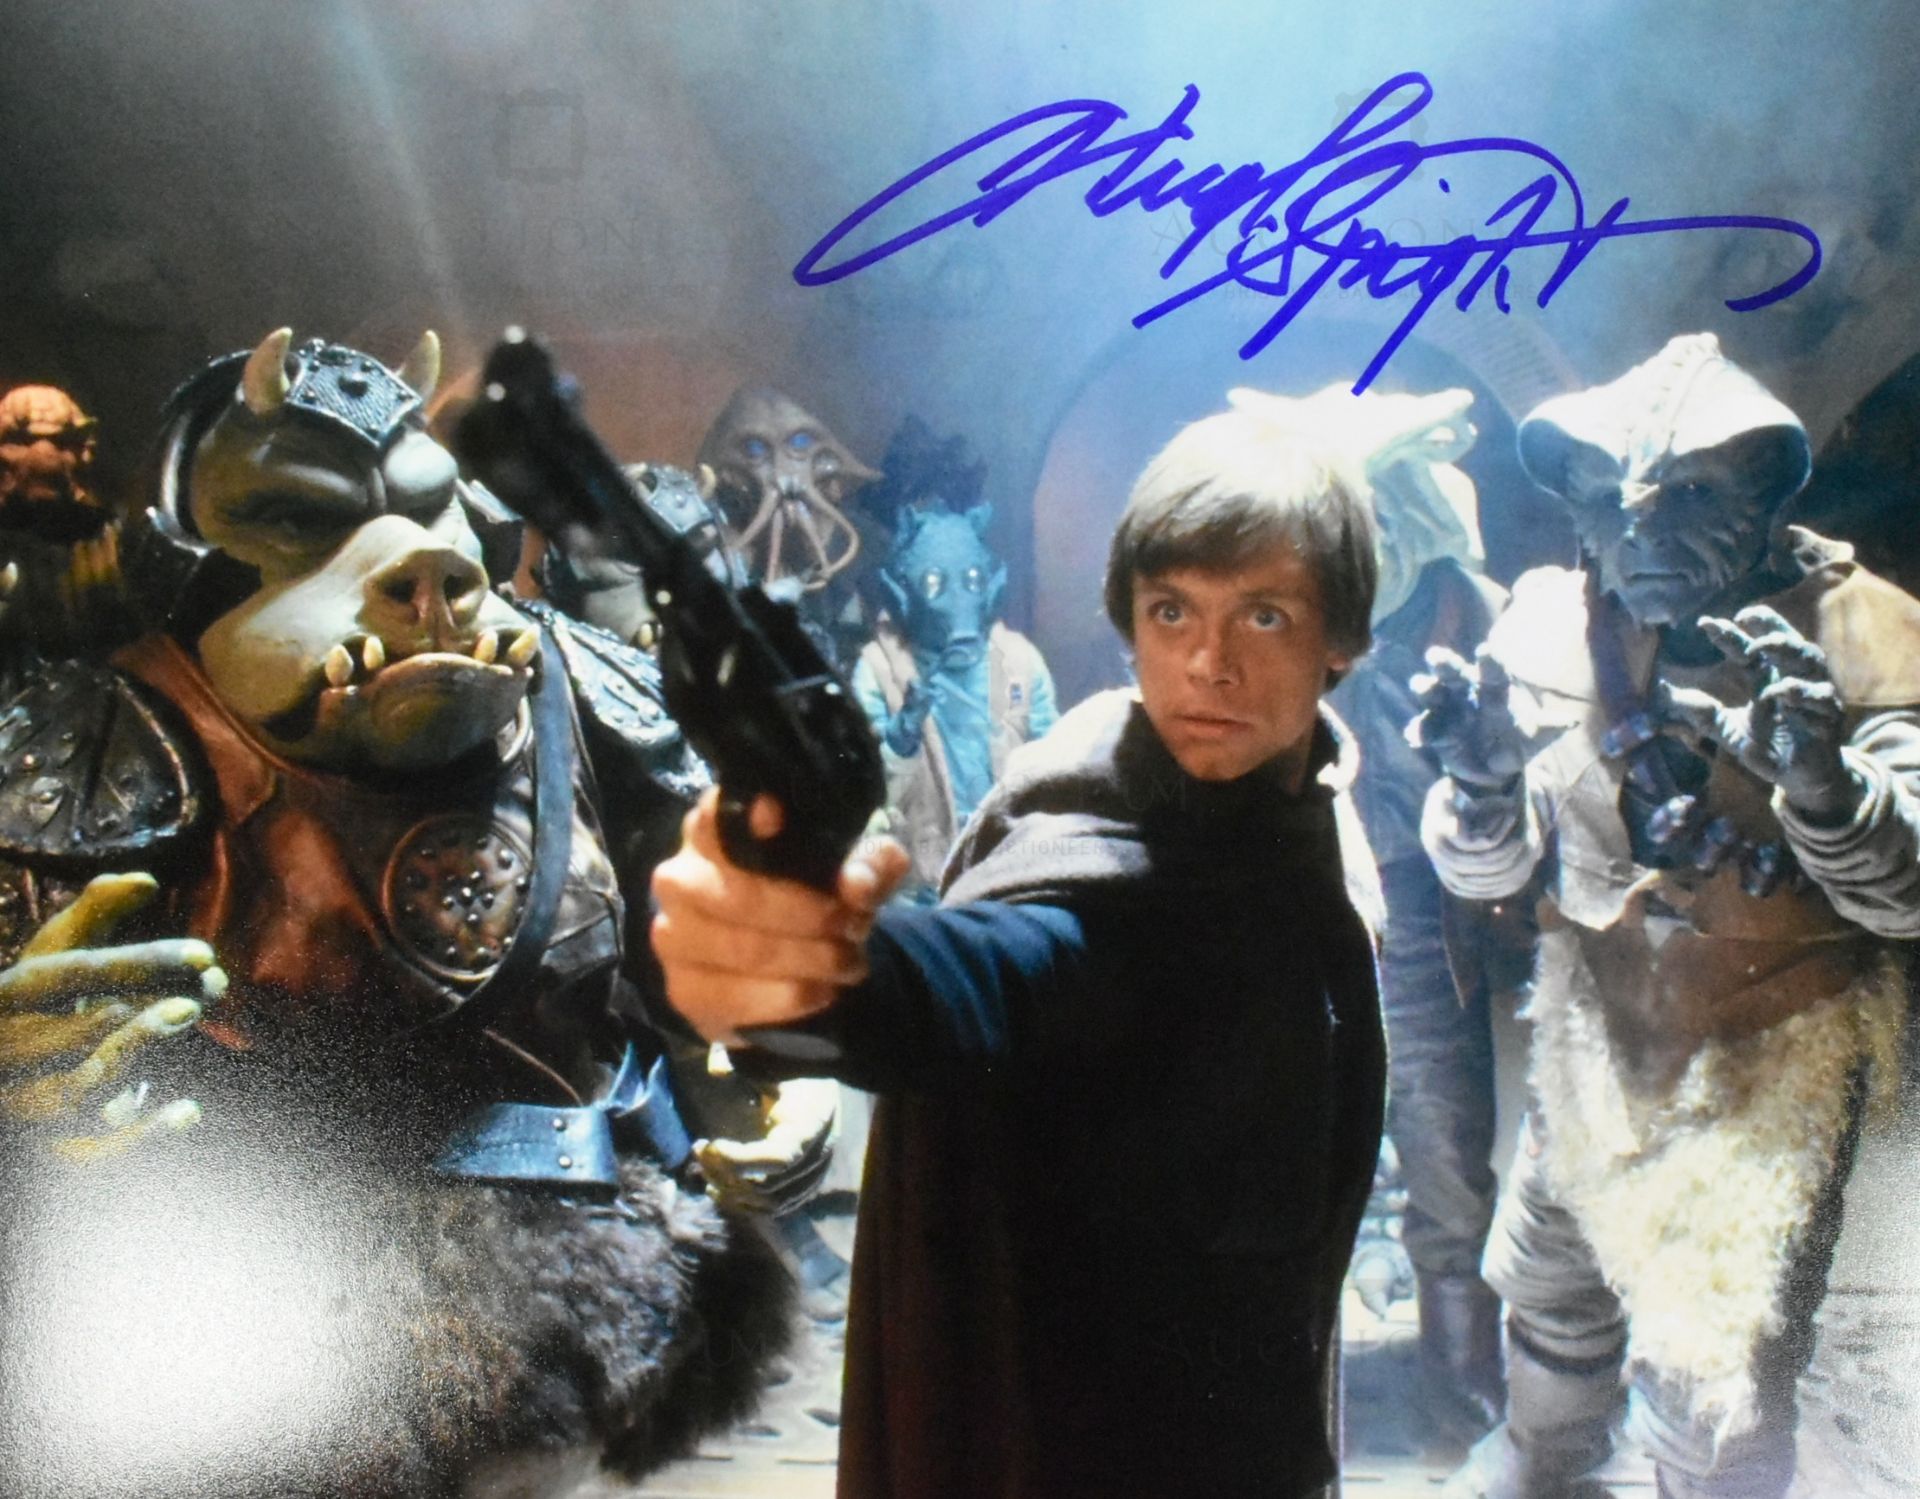 STAR WARS - RETURN OF THE JEDI - COLLECTION OF SIGNED PHOTOS - Image 3 of 5